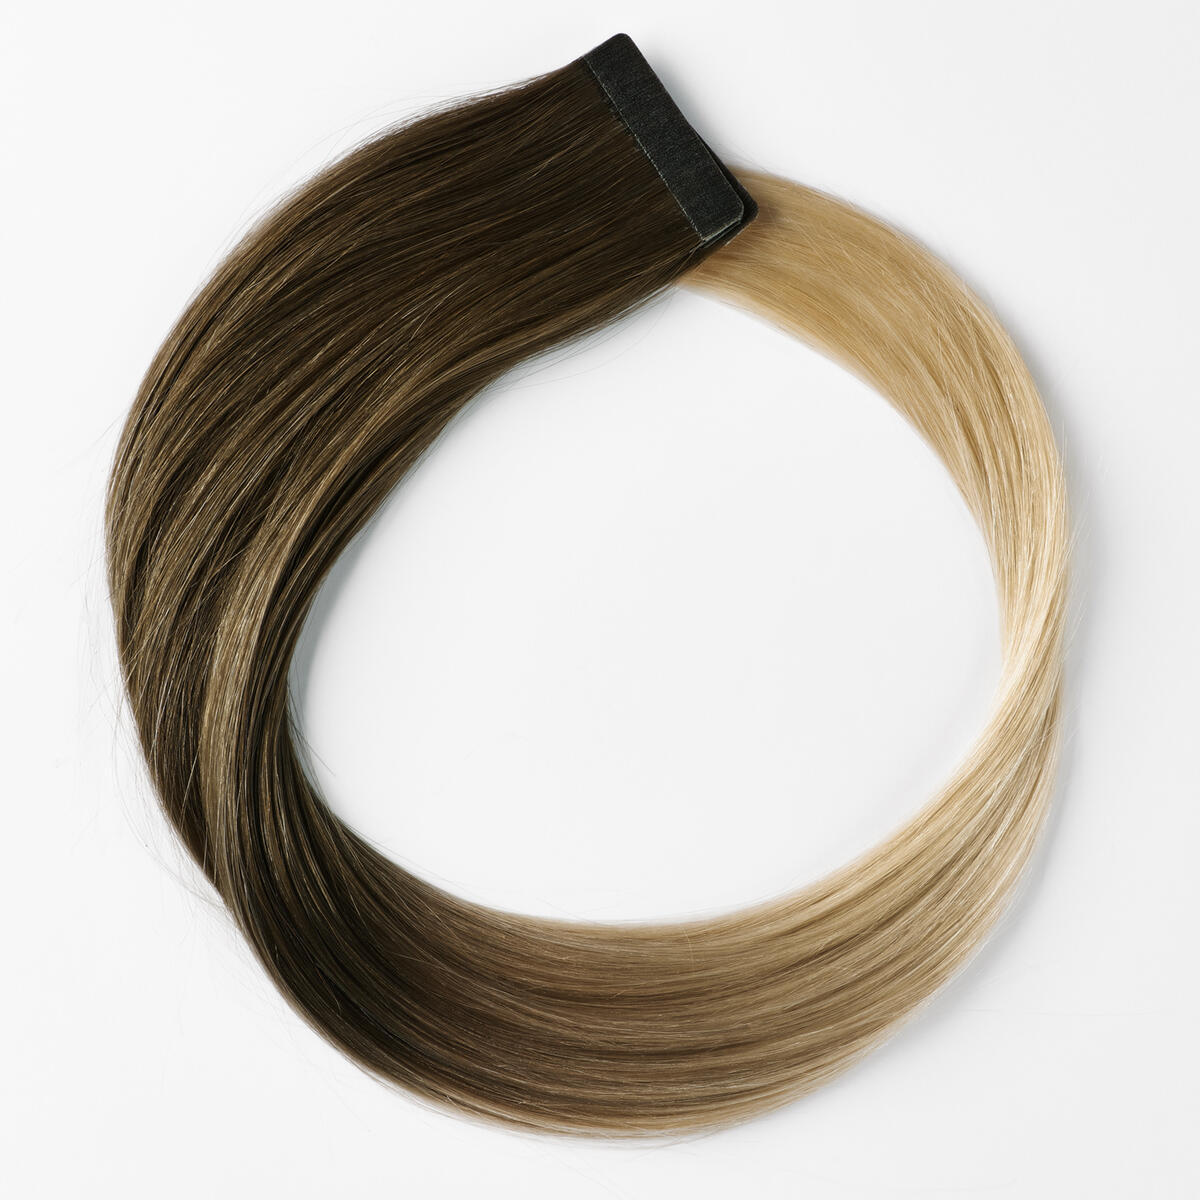 Basic Tape Extensions Classic 4 O2.6/8.0 Dark Ash Blond Ombre 40 cm